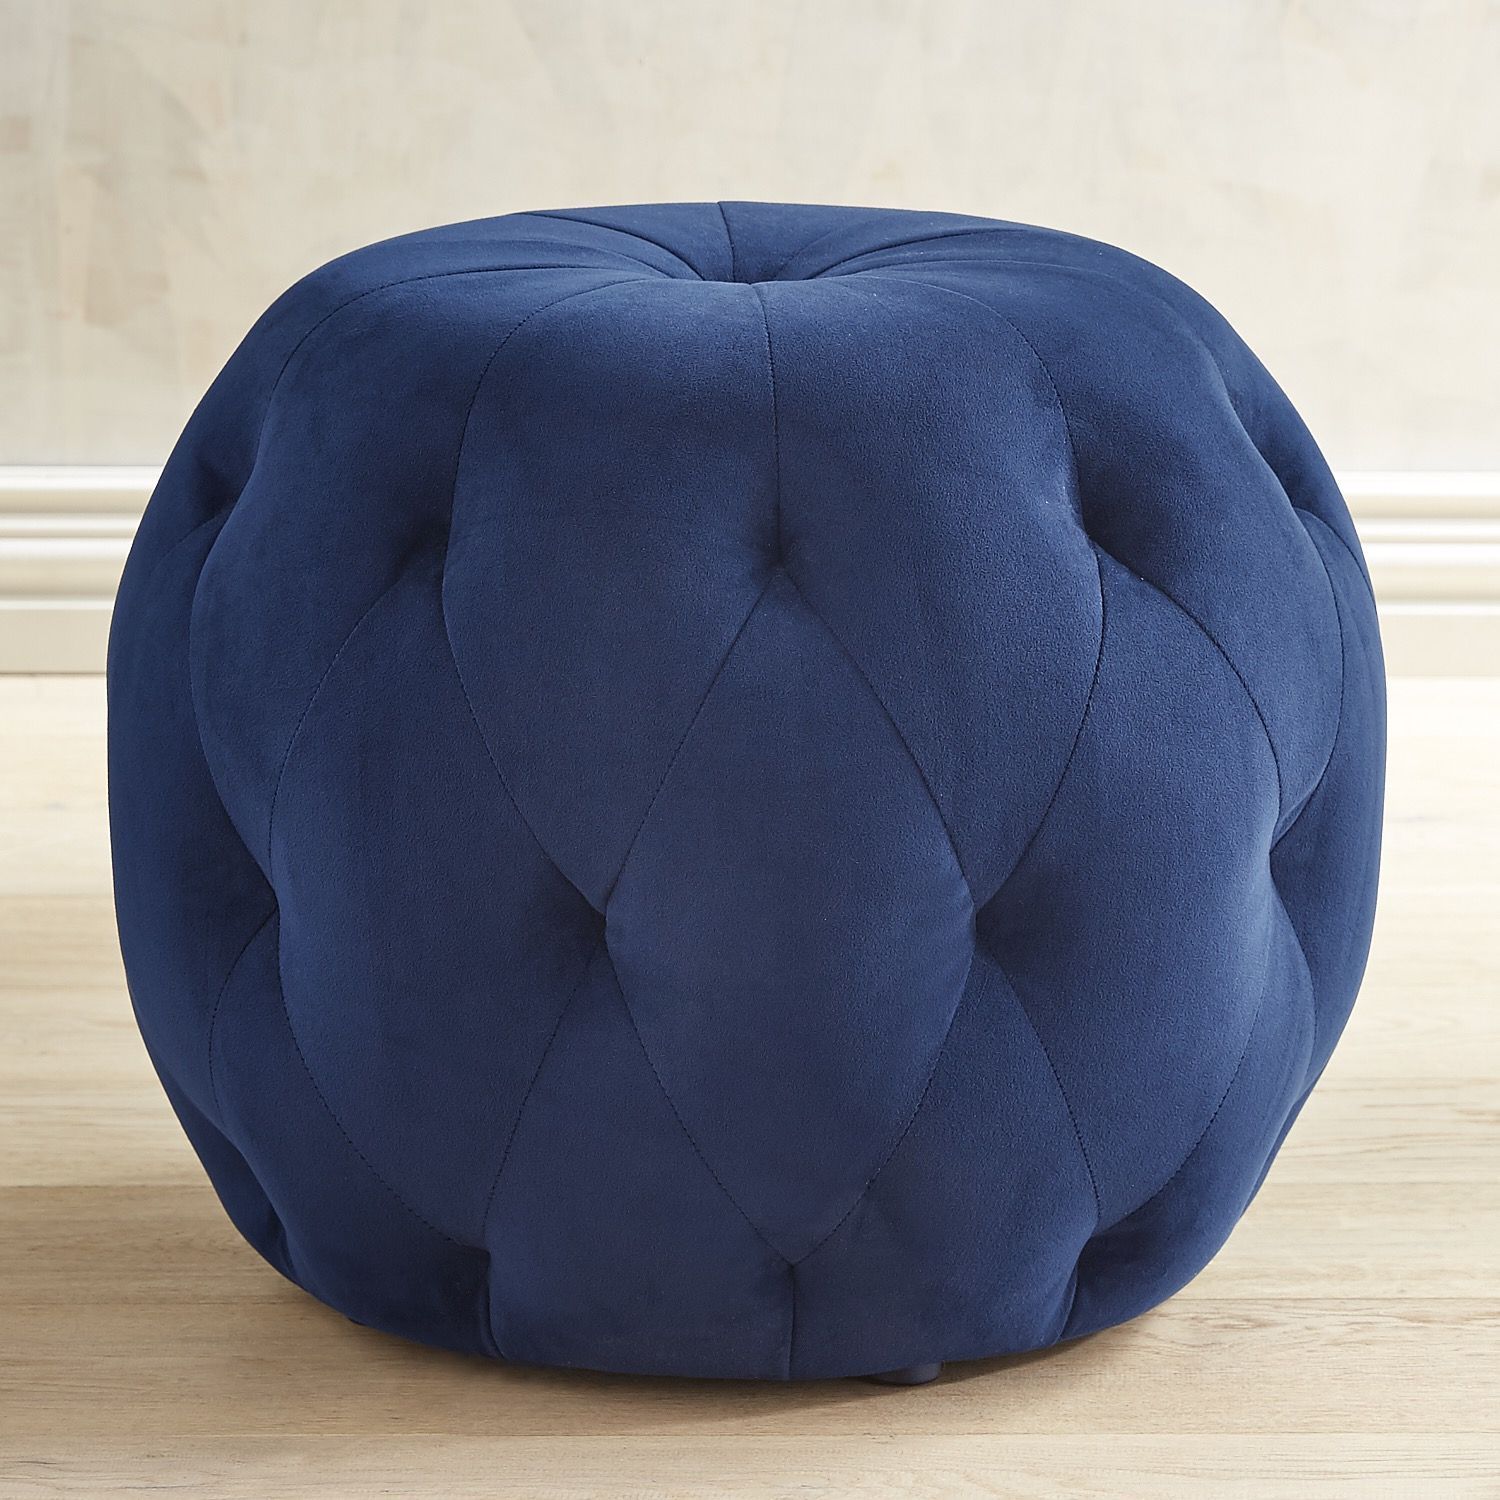 Ormand Navy Tufted Ottoman Blue | Tufted Ottoman, Blue Bedroom With Regard To Navy And Light Gray Woven Pouf Ottomans (View 19 of 20)